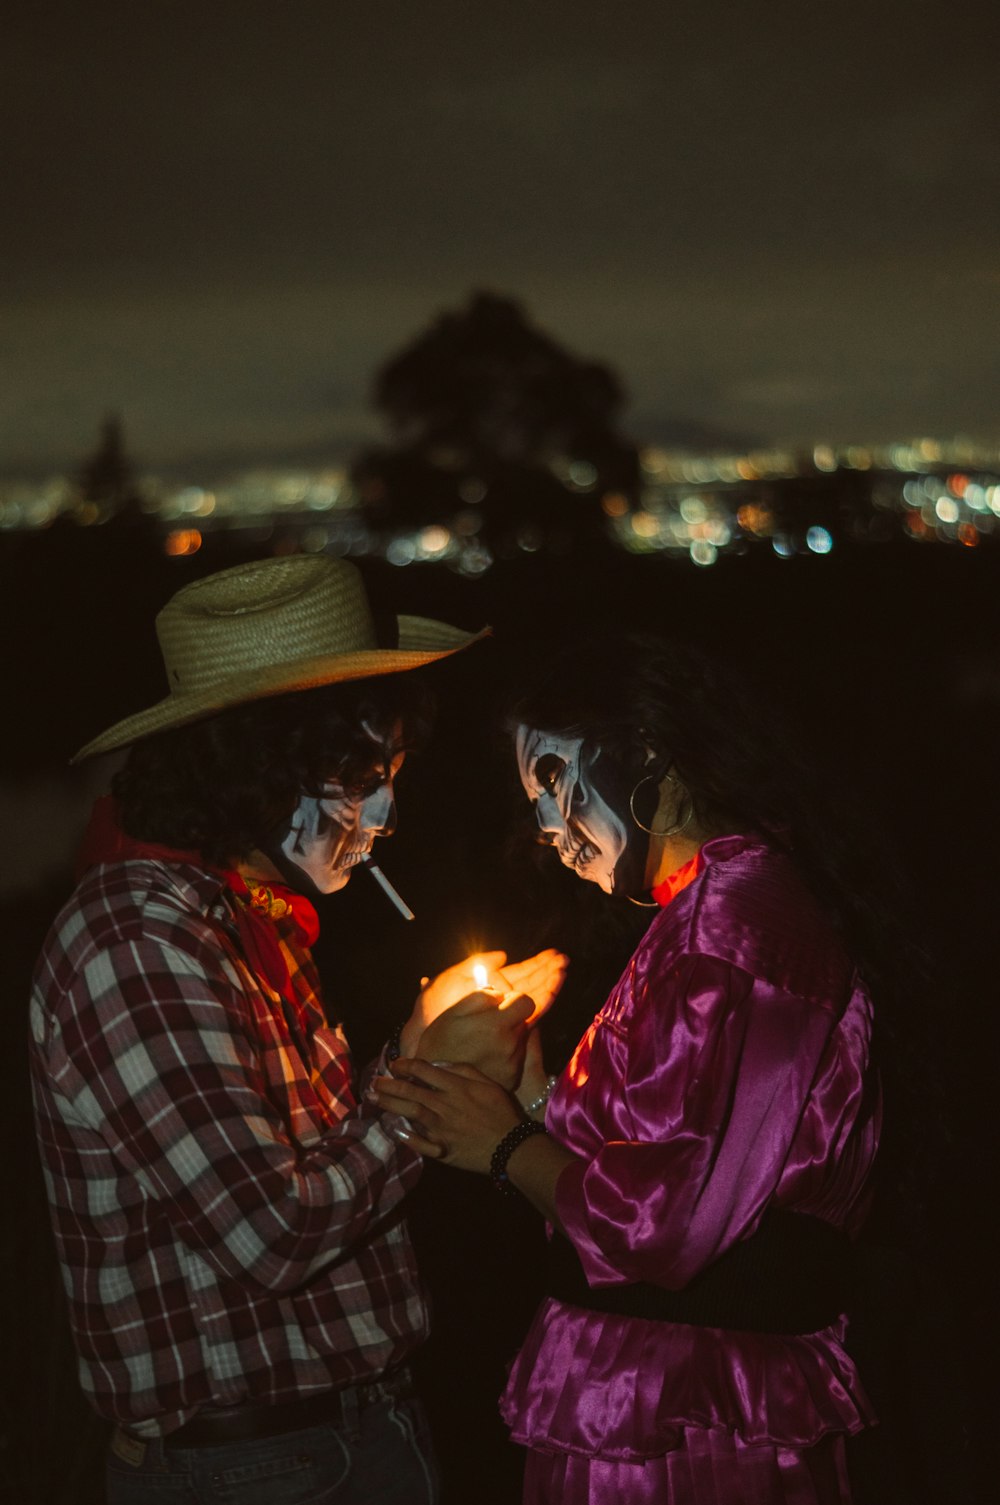 a man and a woman in costumes holding a lit candle